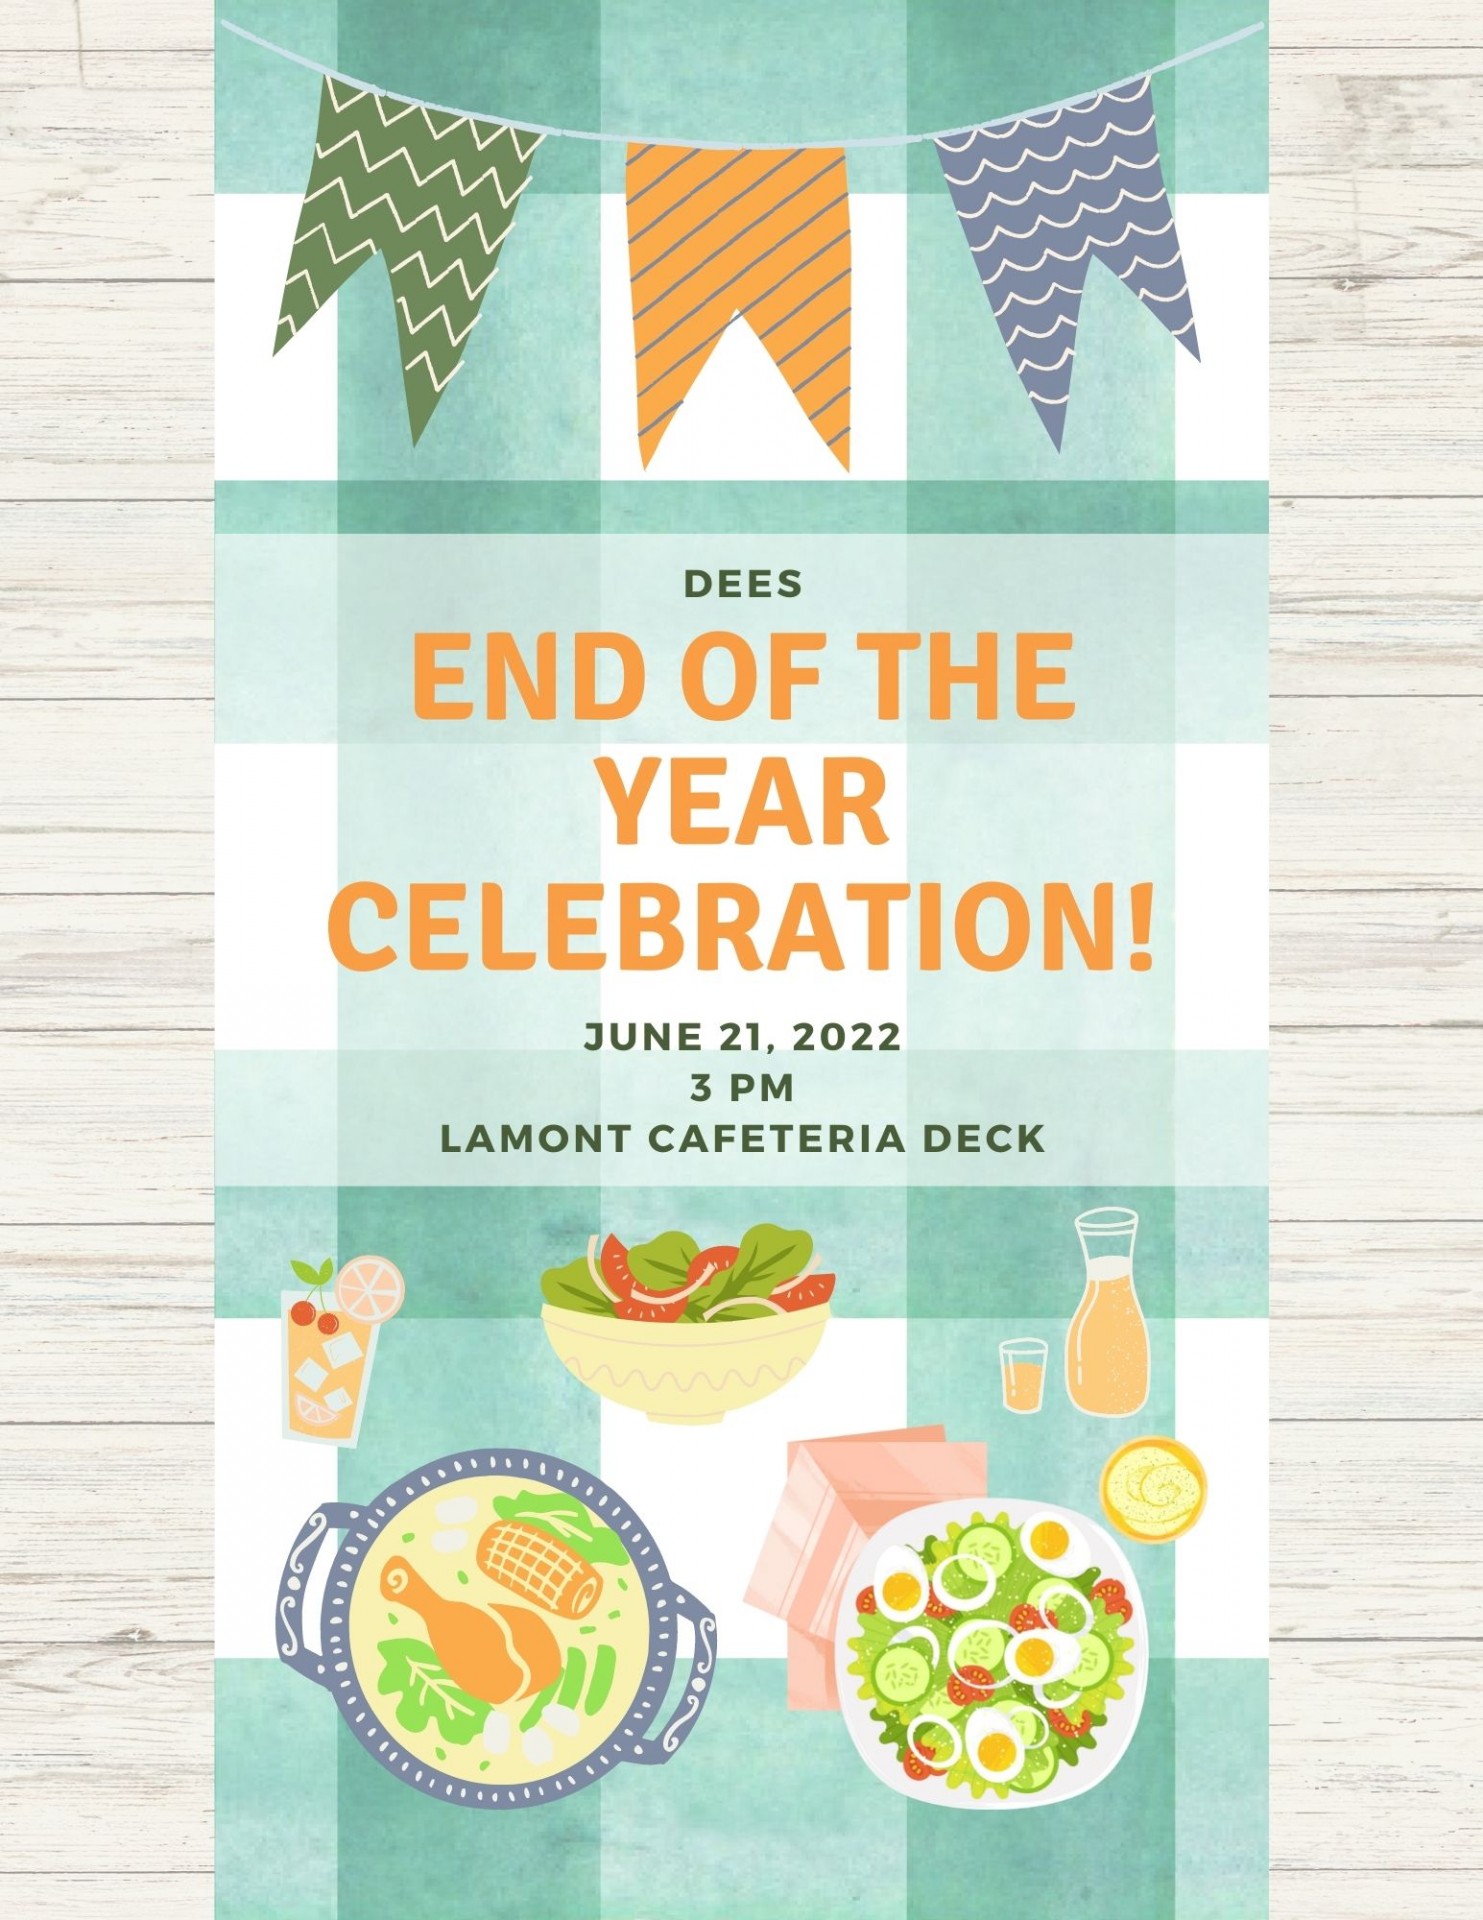 End of the Year Celebration on June 21 at 3 pm. Lamont Cafeteria Deck